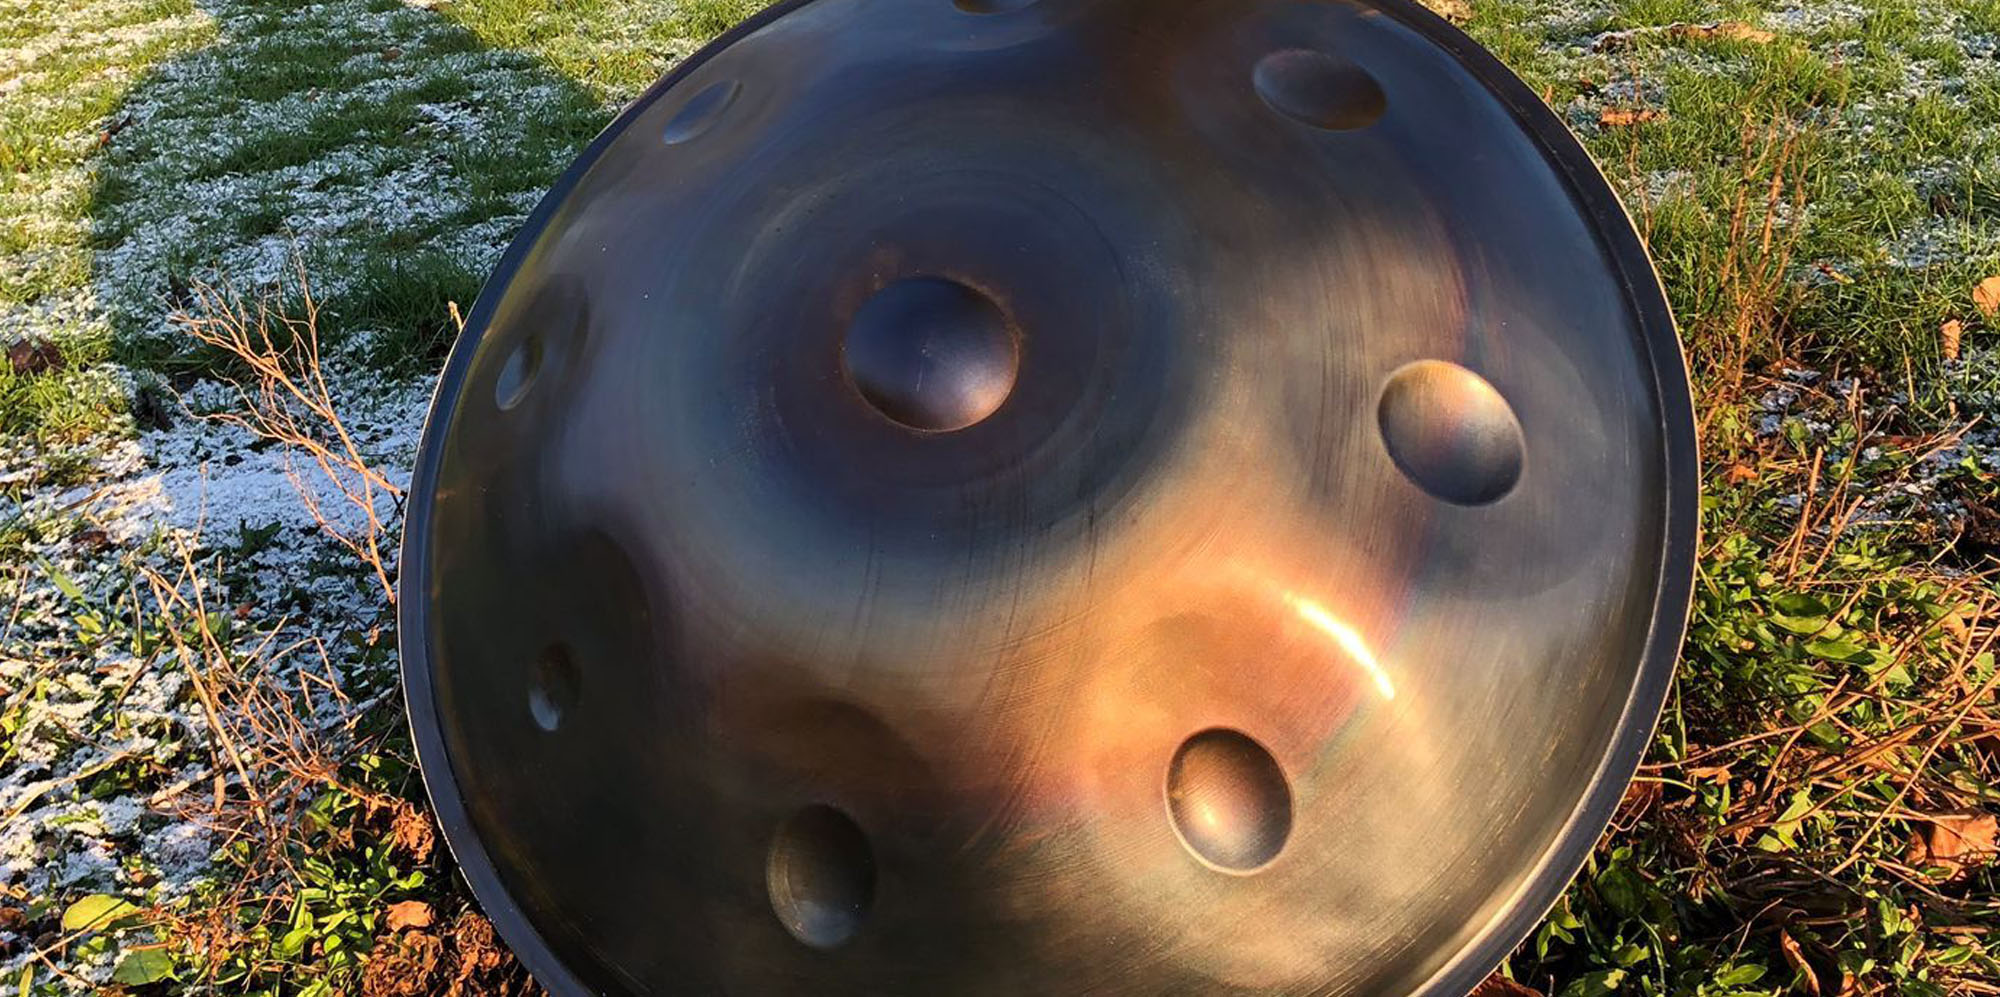 Do you want to buy a handpan? Here's all you need to know